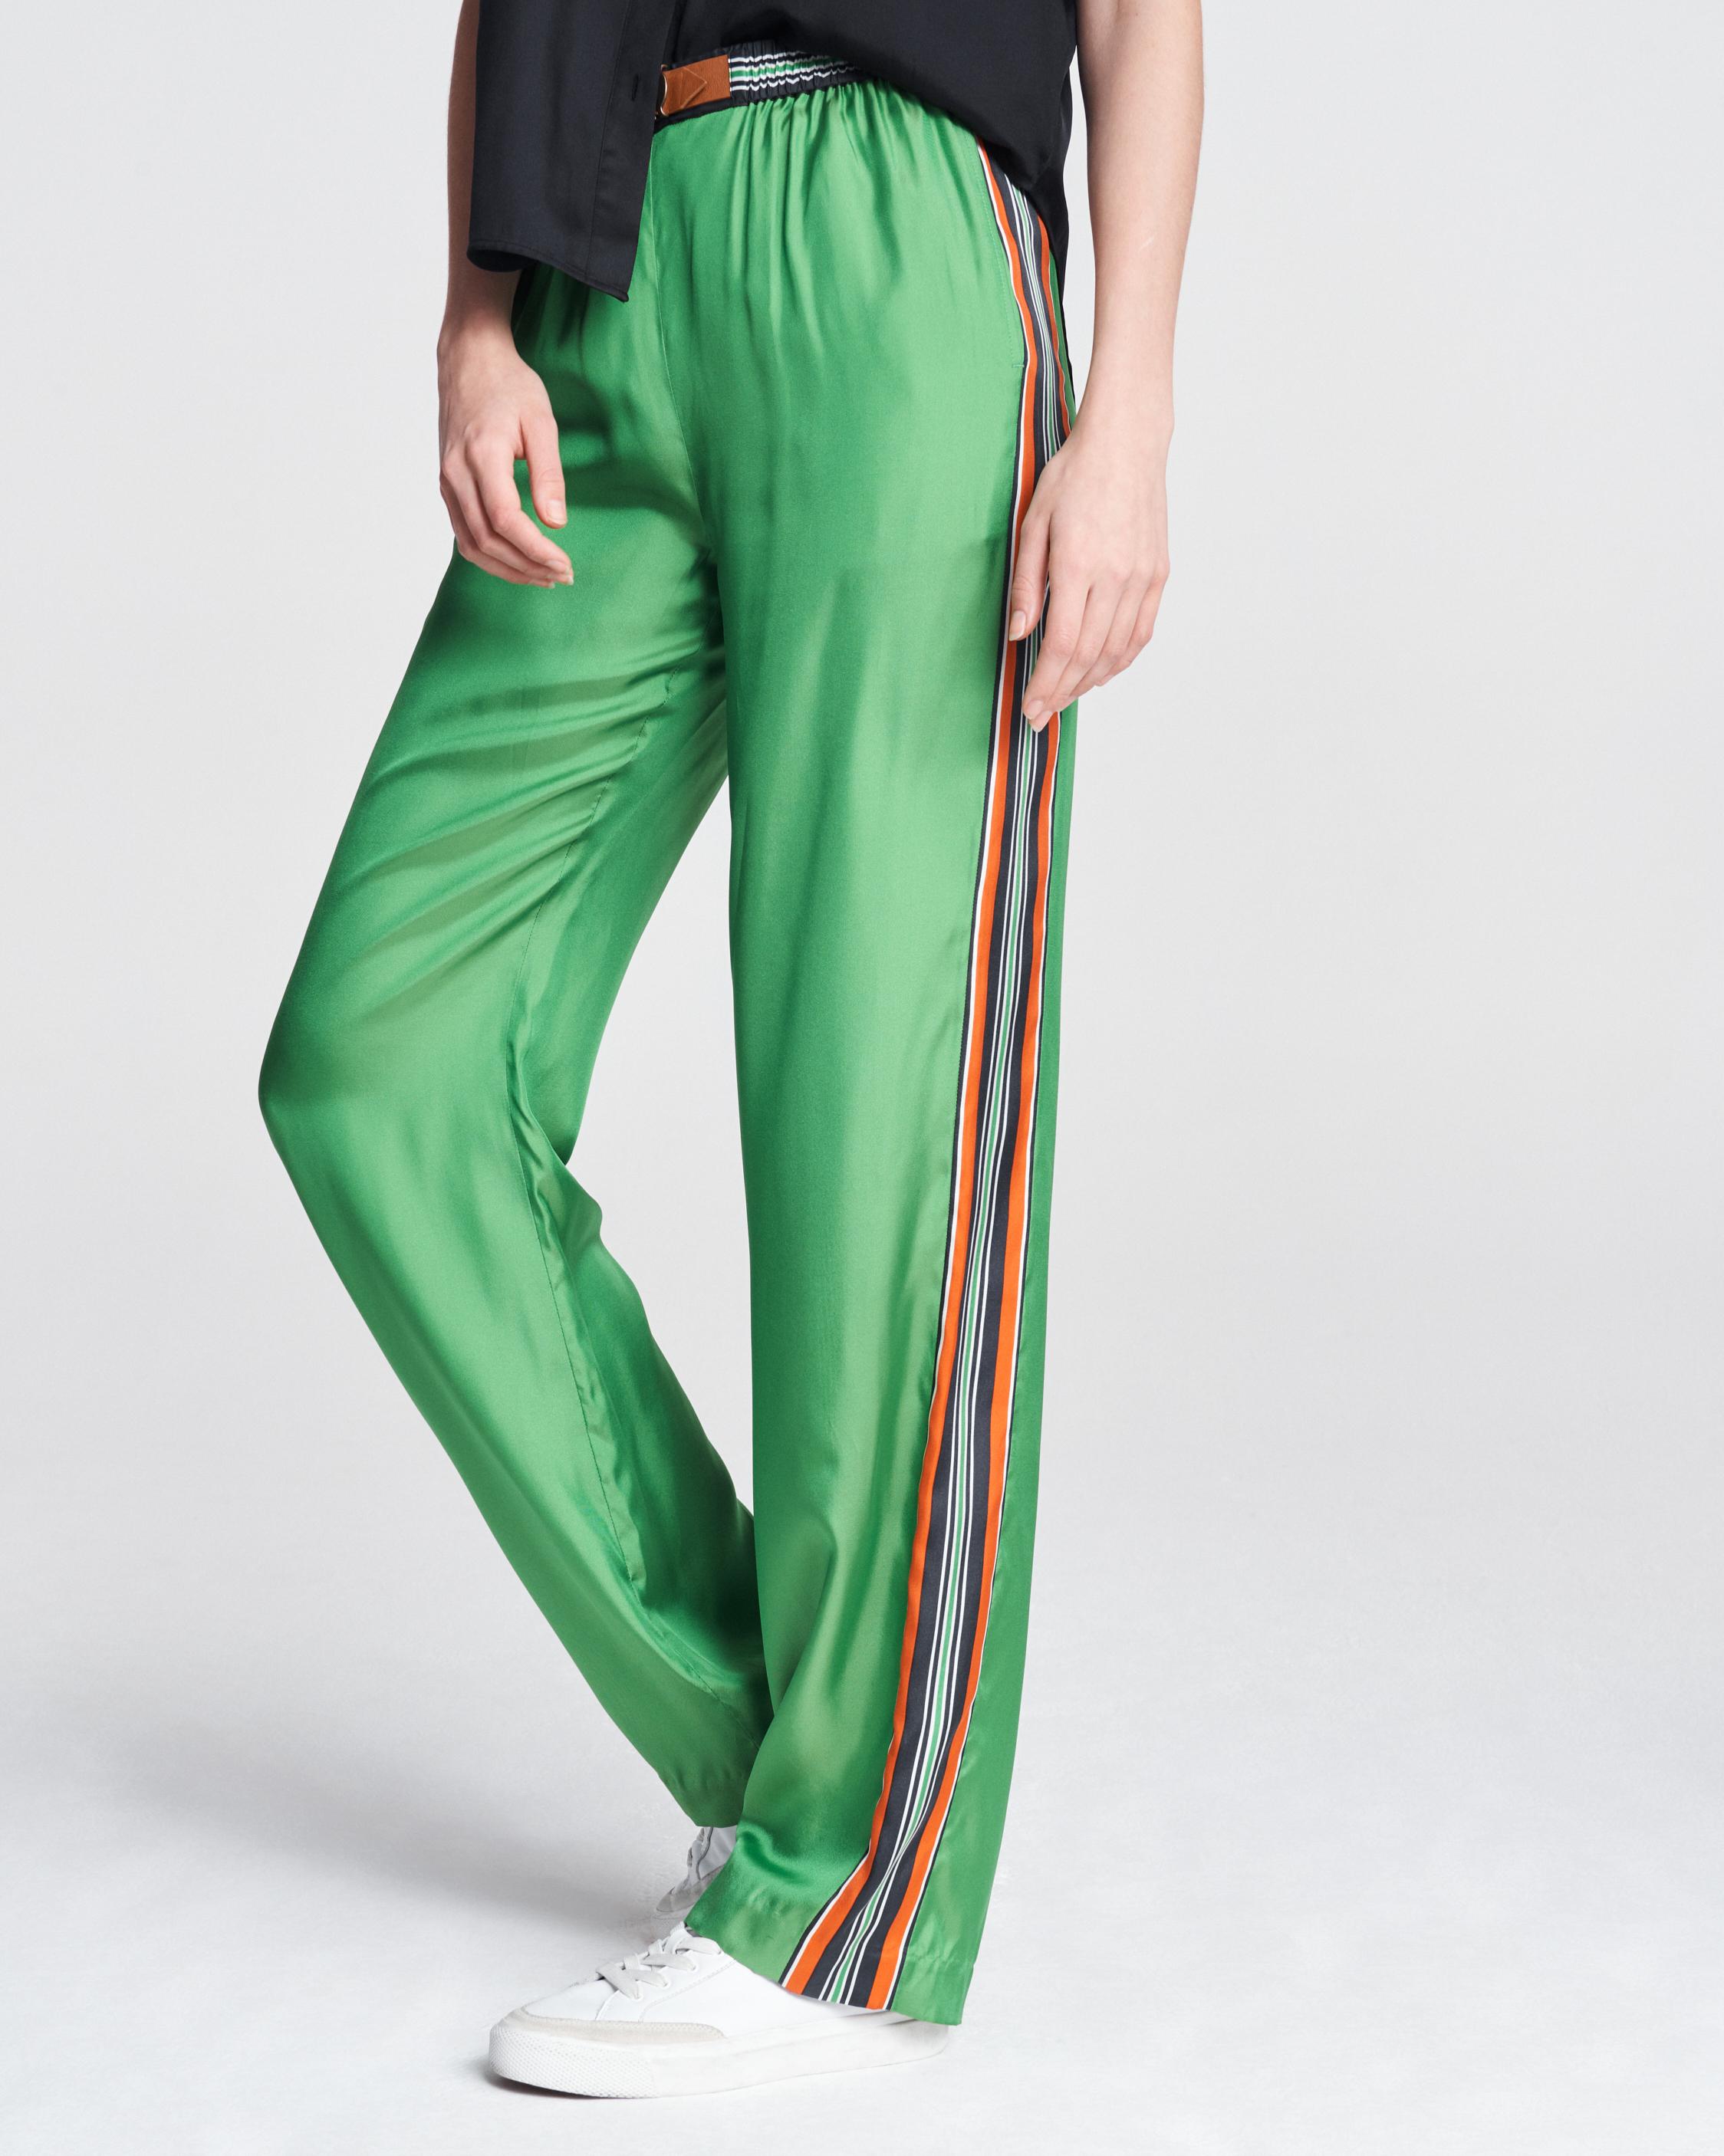 Buy Grey & Green Trousers & Pants for Girls by INDIWEAVES Online